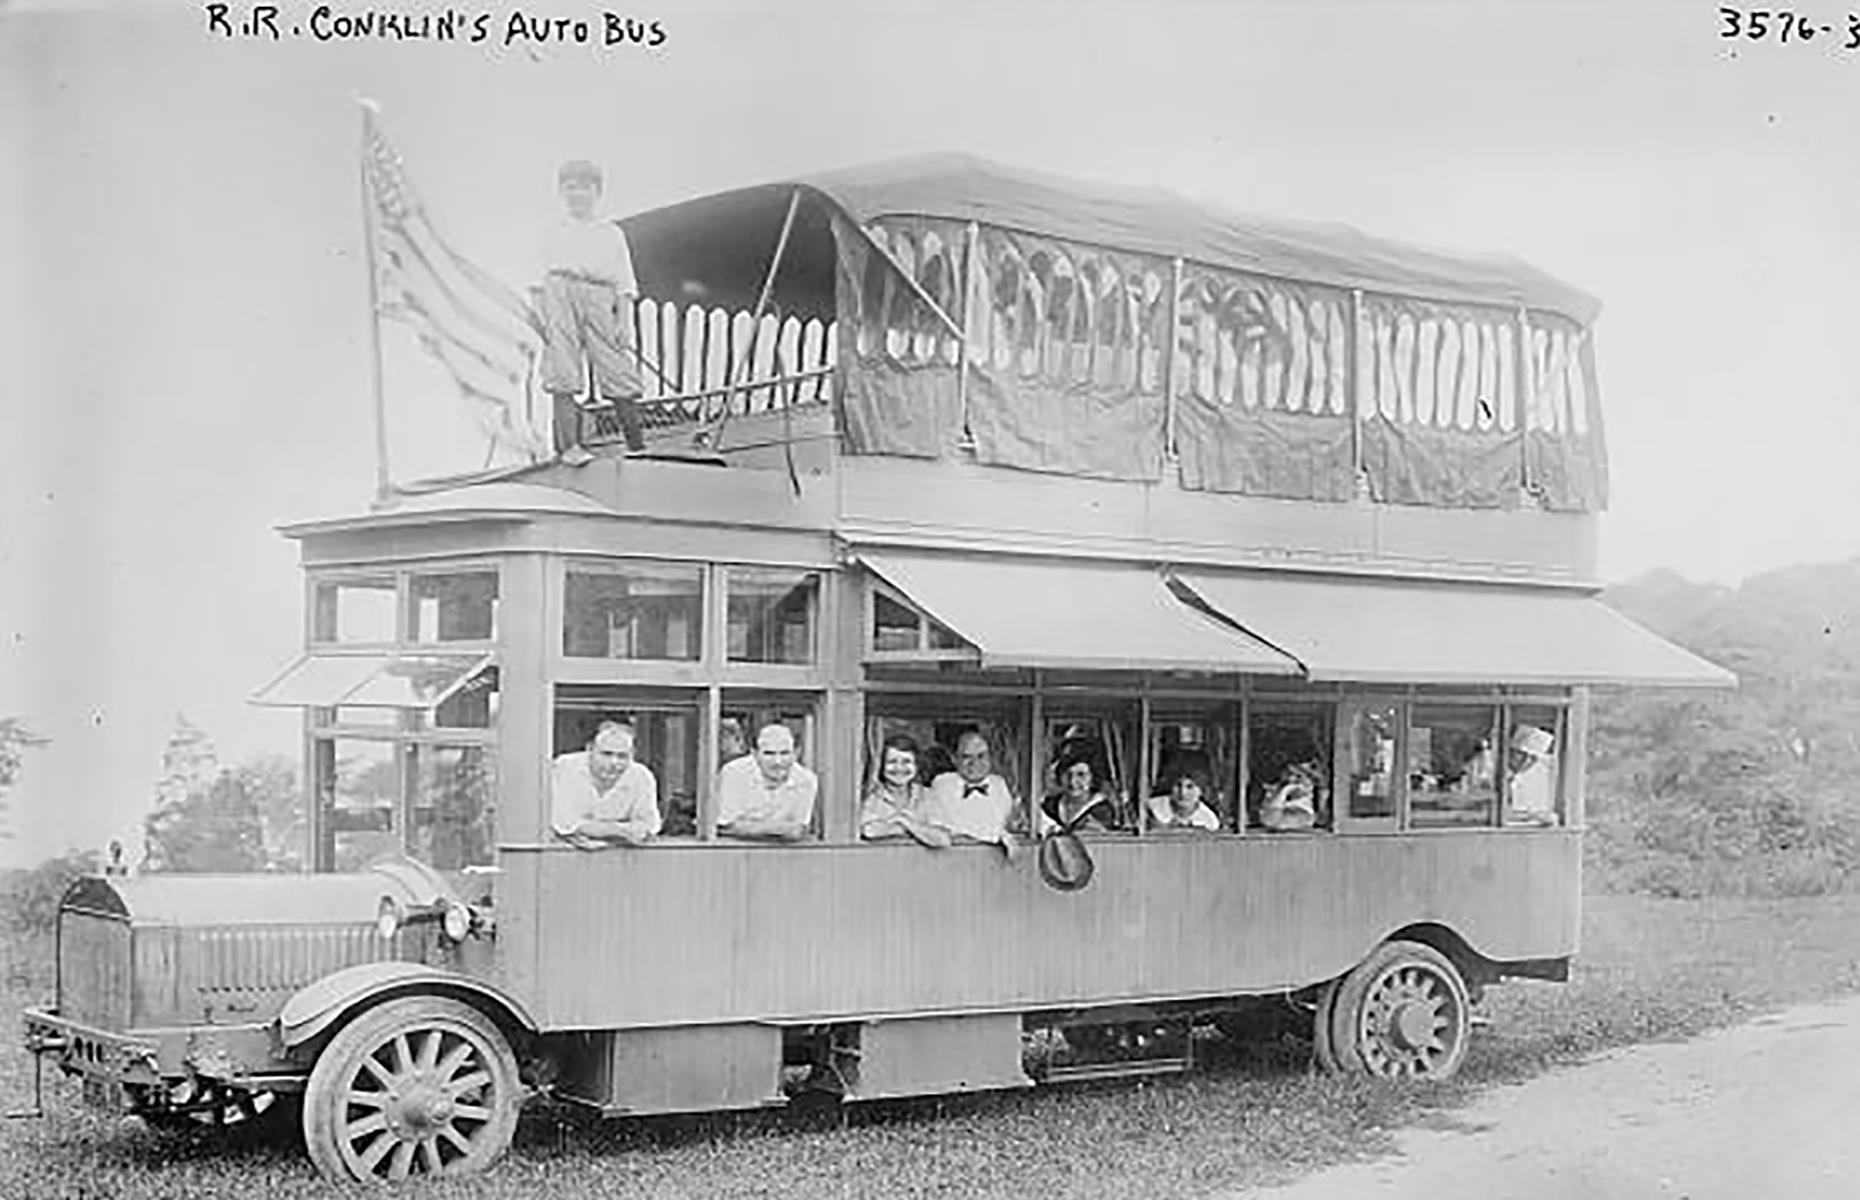 <p>You might be surprised to learn that the world’s first recreational vehicle, or RV, was invented back in 1915. The 25-foot (7.6m) long automobile was created by Roland Conklin’s Gas-Electric Motor Bus Company and dubbed the Gypsy Van. It was kitted out with a kitchen, sleeping berths, folding tables, various small appliances, a generator and lighting. It was used by the Conklin family to travel from Huntington, New York to San Francisco, California on a journey that captured the attention of national media. </p>  <p><a href="https://www.loveexploring.com/gallerylist/131025/the-amazing-history-of-rving-in-america"><strong>Now discover the fascinating history of RV-ing in America</strong></a></p>